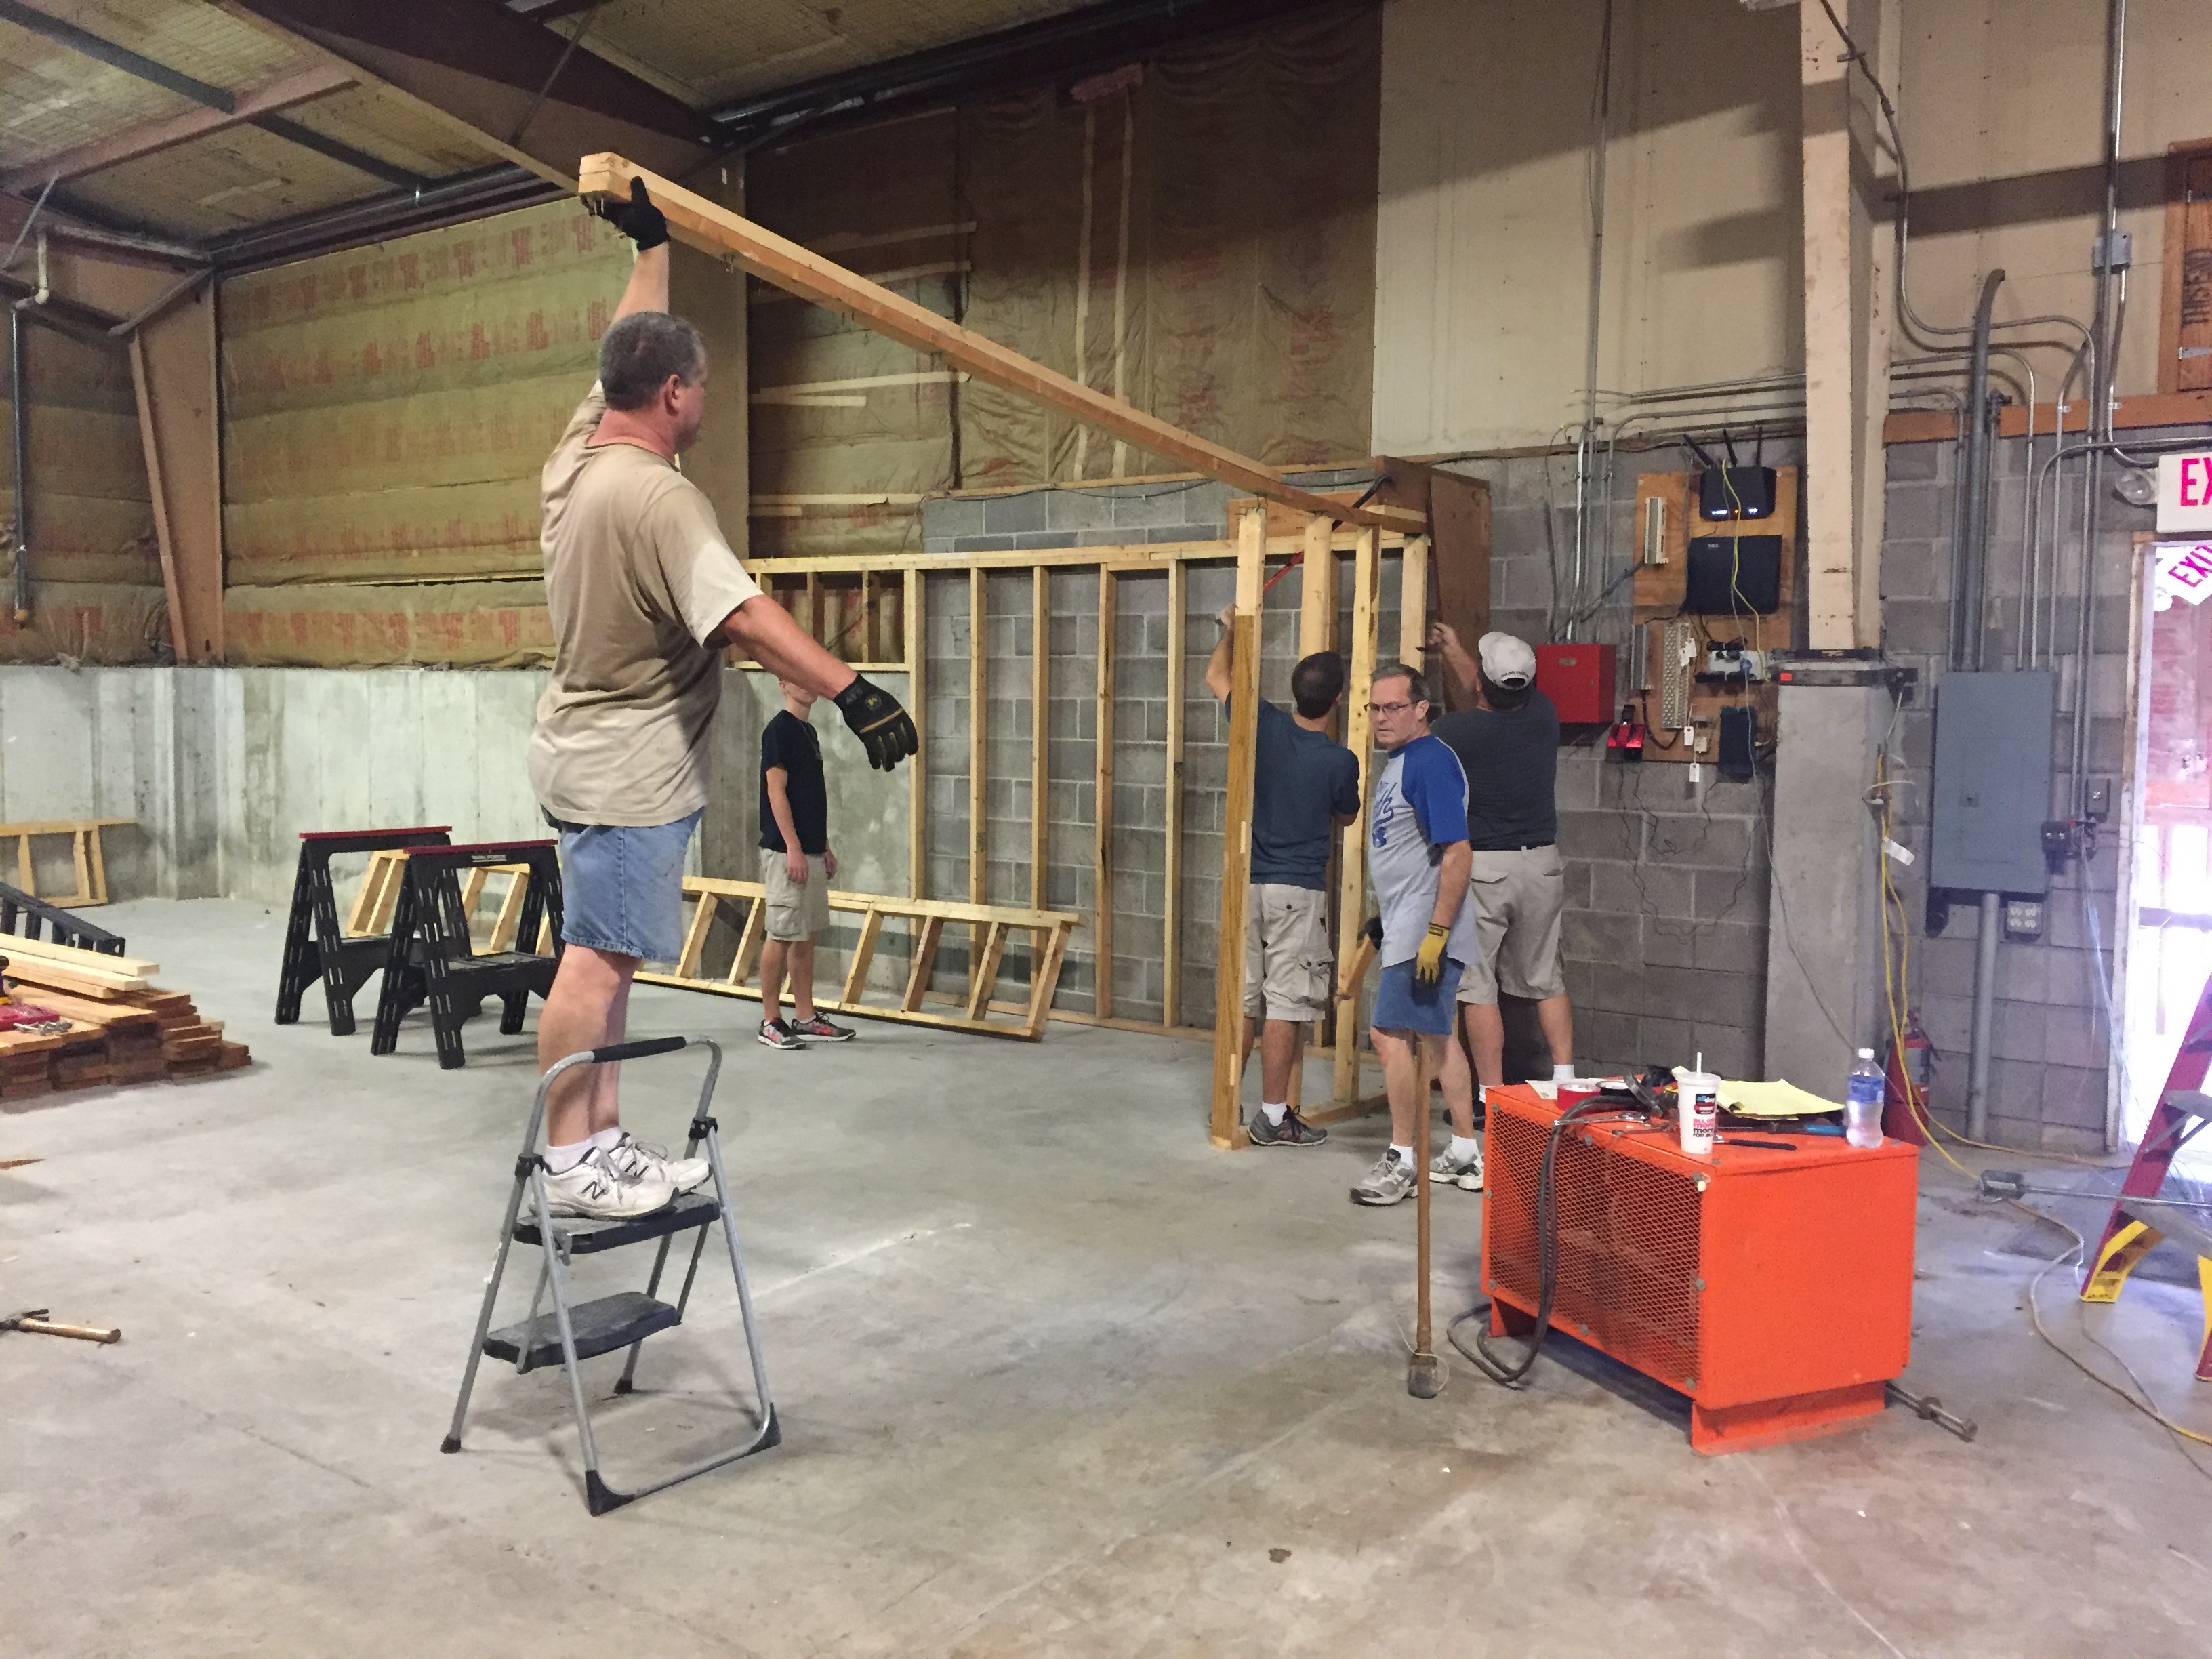 Work continues on removing the loft from the warehouse.